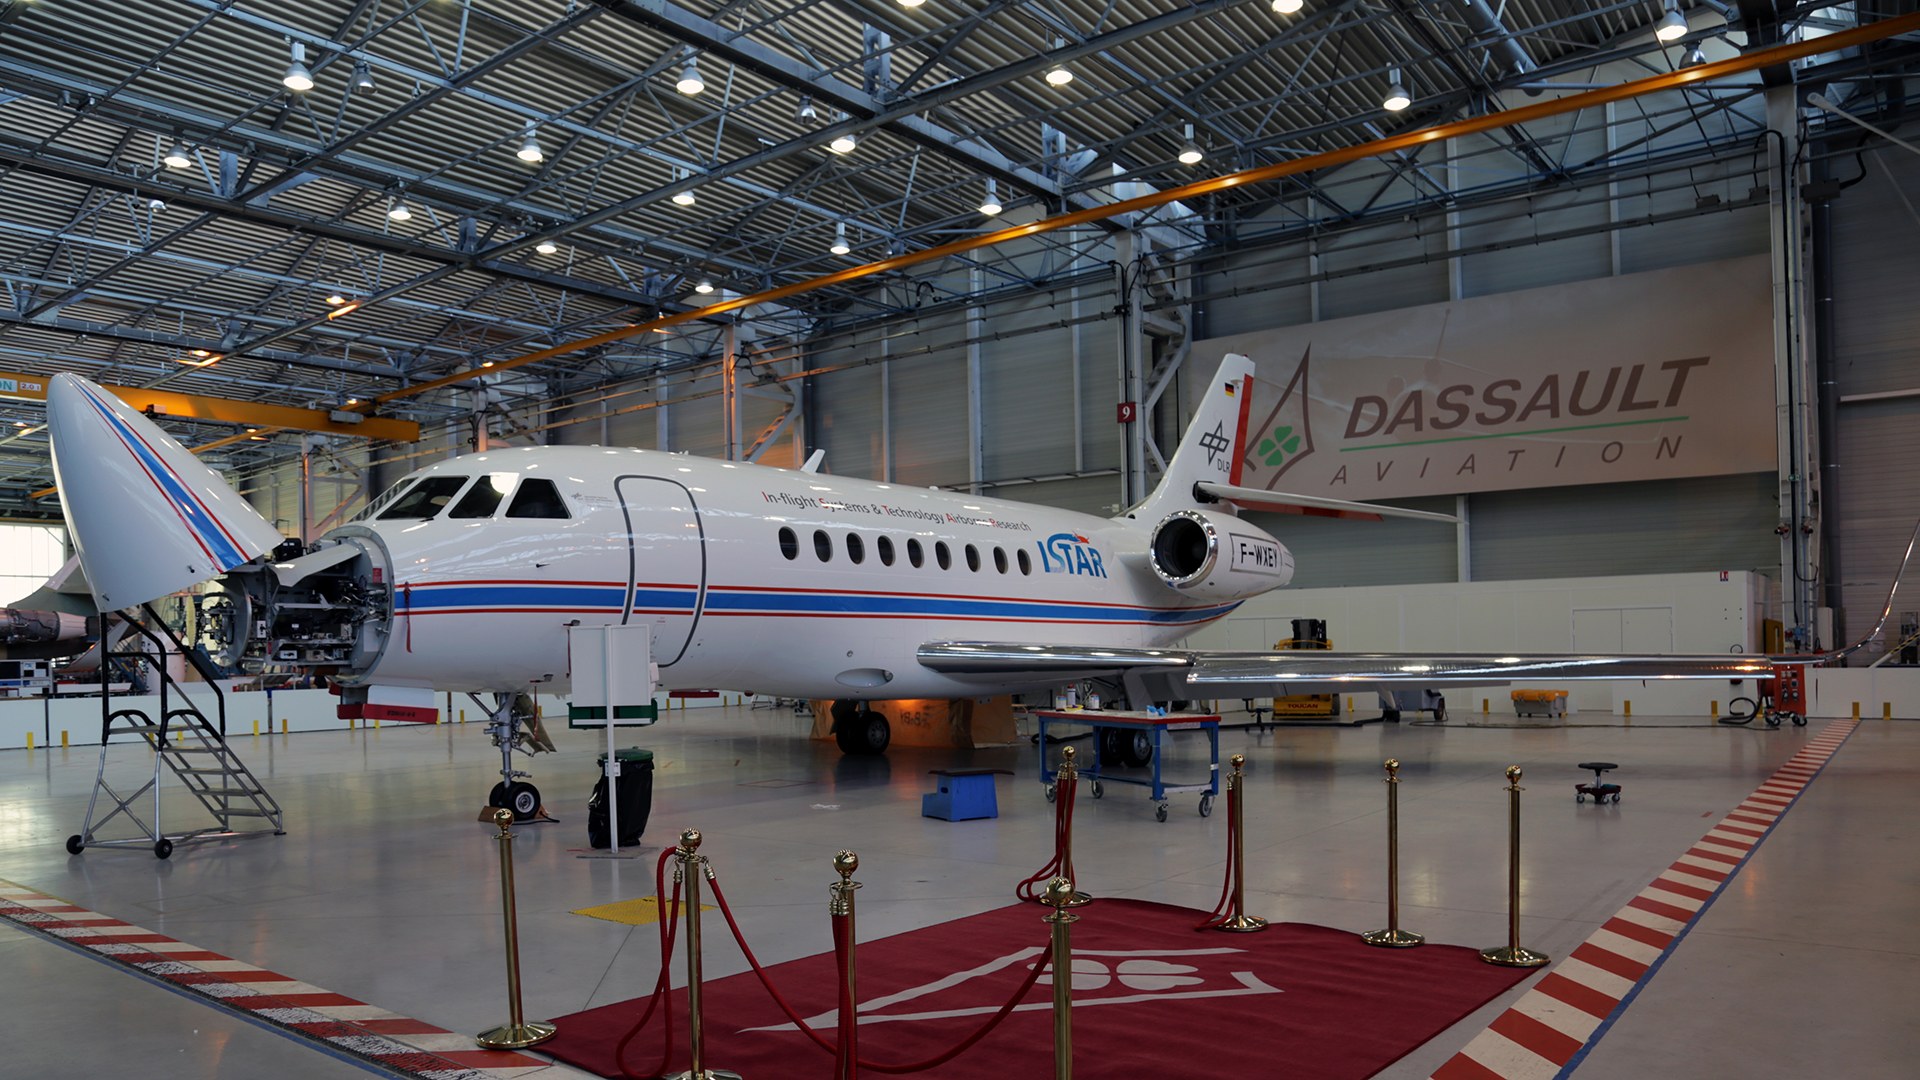 DLR ISTAR research aircraft